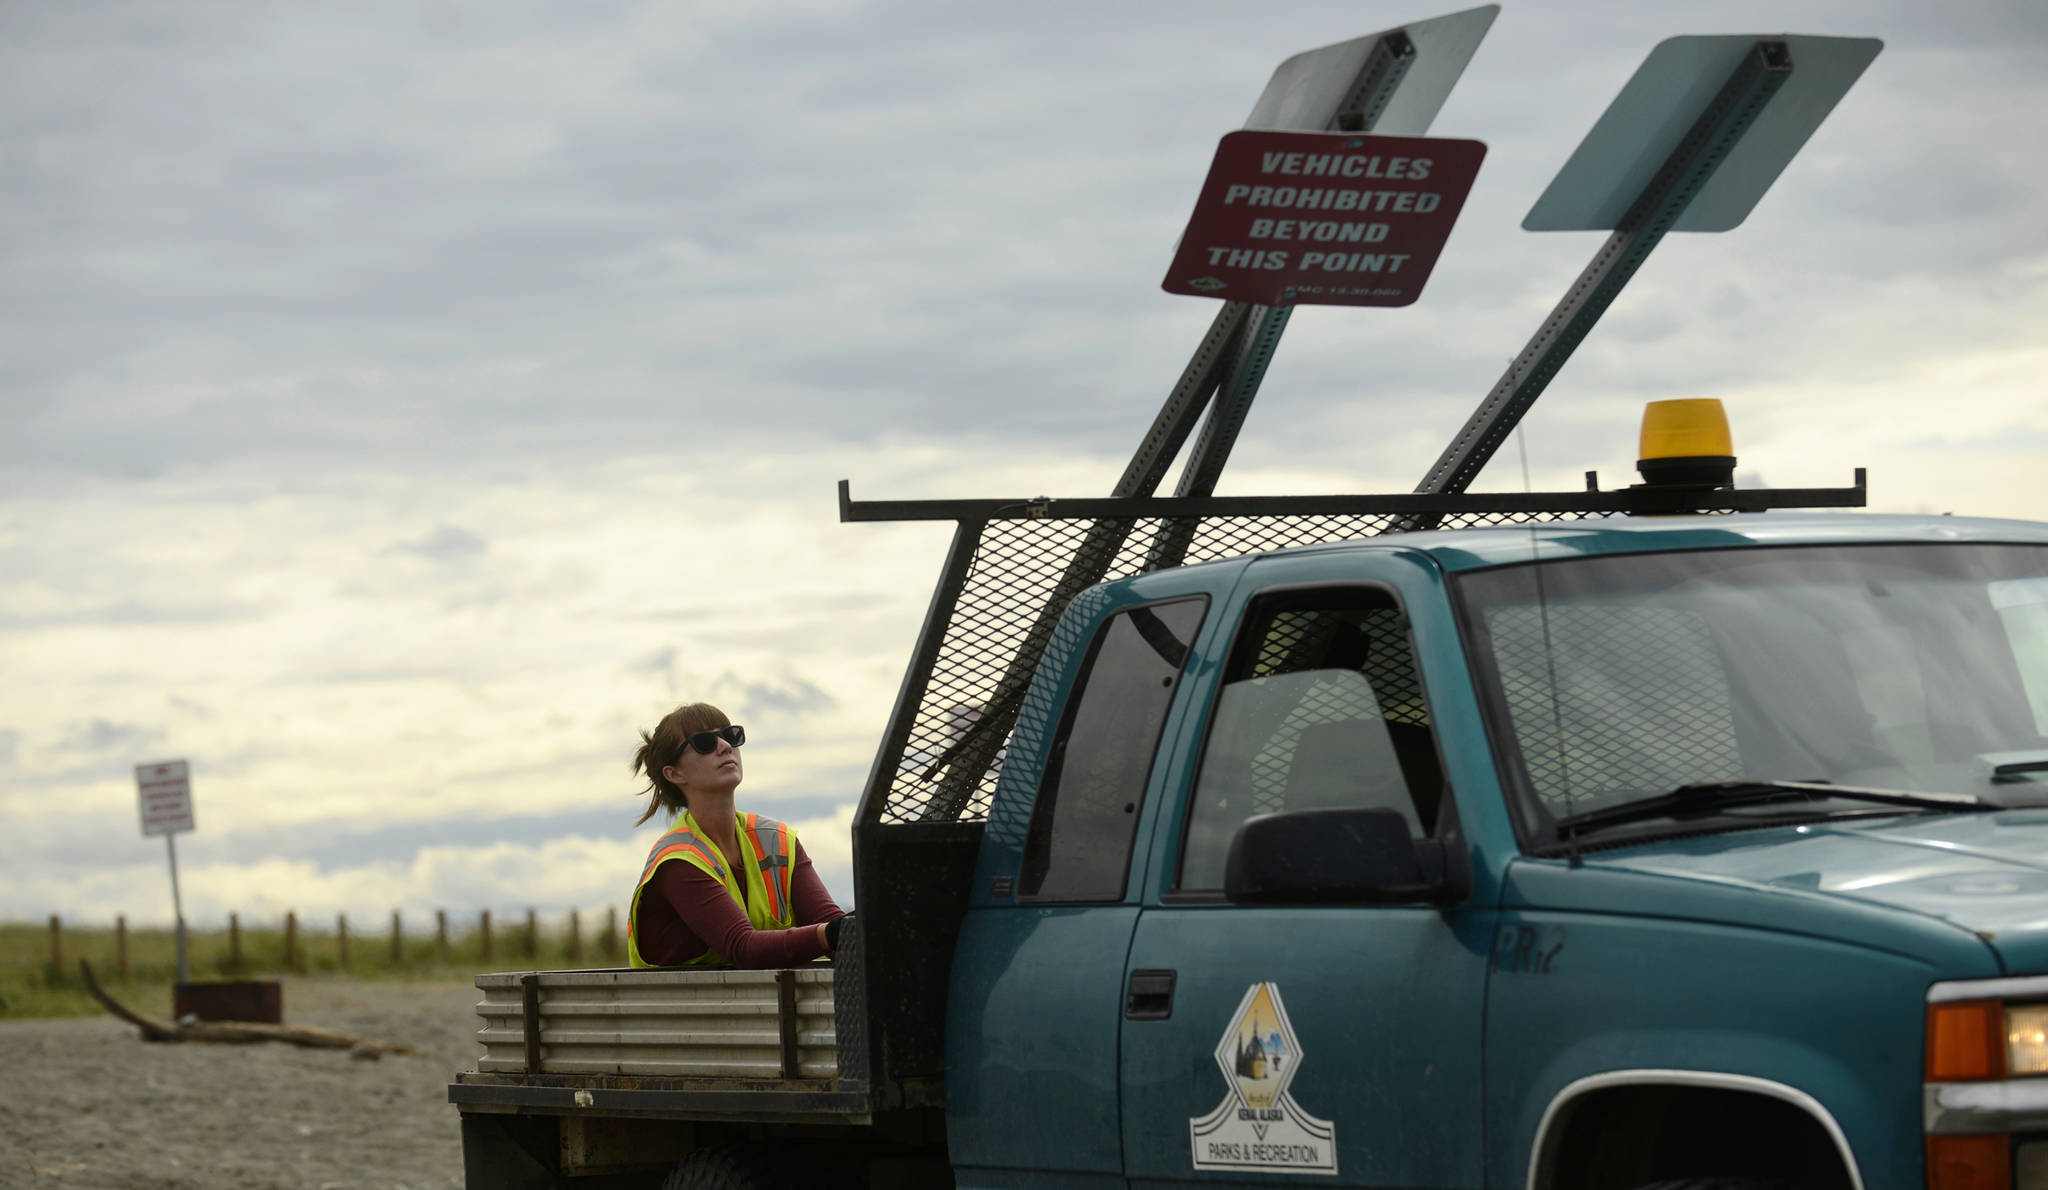 Alinna Granados of the Kenai Parks and Recreation Department takes down beach signs after the end of the personal use dipnet fishery on Tuesday, August 1, 2017 on Kenai’s north beach. Granados and fellow Parks and Rec employee Randy Dodge, who used a loader to pull the signs from the sand, took down signage and barriers after the beach had been cleaned of trash and fish waste earlier that morning. Alinna Granados of the Kenai Parks and Recreation Department takes down beach signs after the end of the personal use dipnet fishery on Tuesday, August 1, 2017 on Kenai’s north beach. Granados and fellow Parks and Rec employee Randy Dodge, who used a loader to pull the signs from the sand, took down signage and barriers after the beach had been cleaned of trash and fish waste earlier that morning.